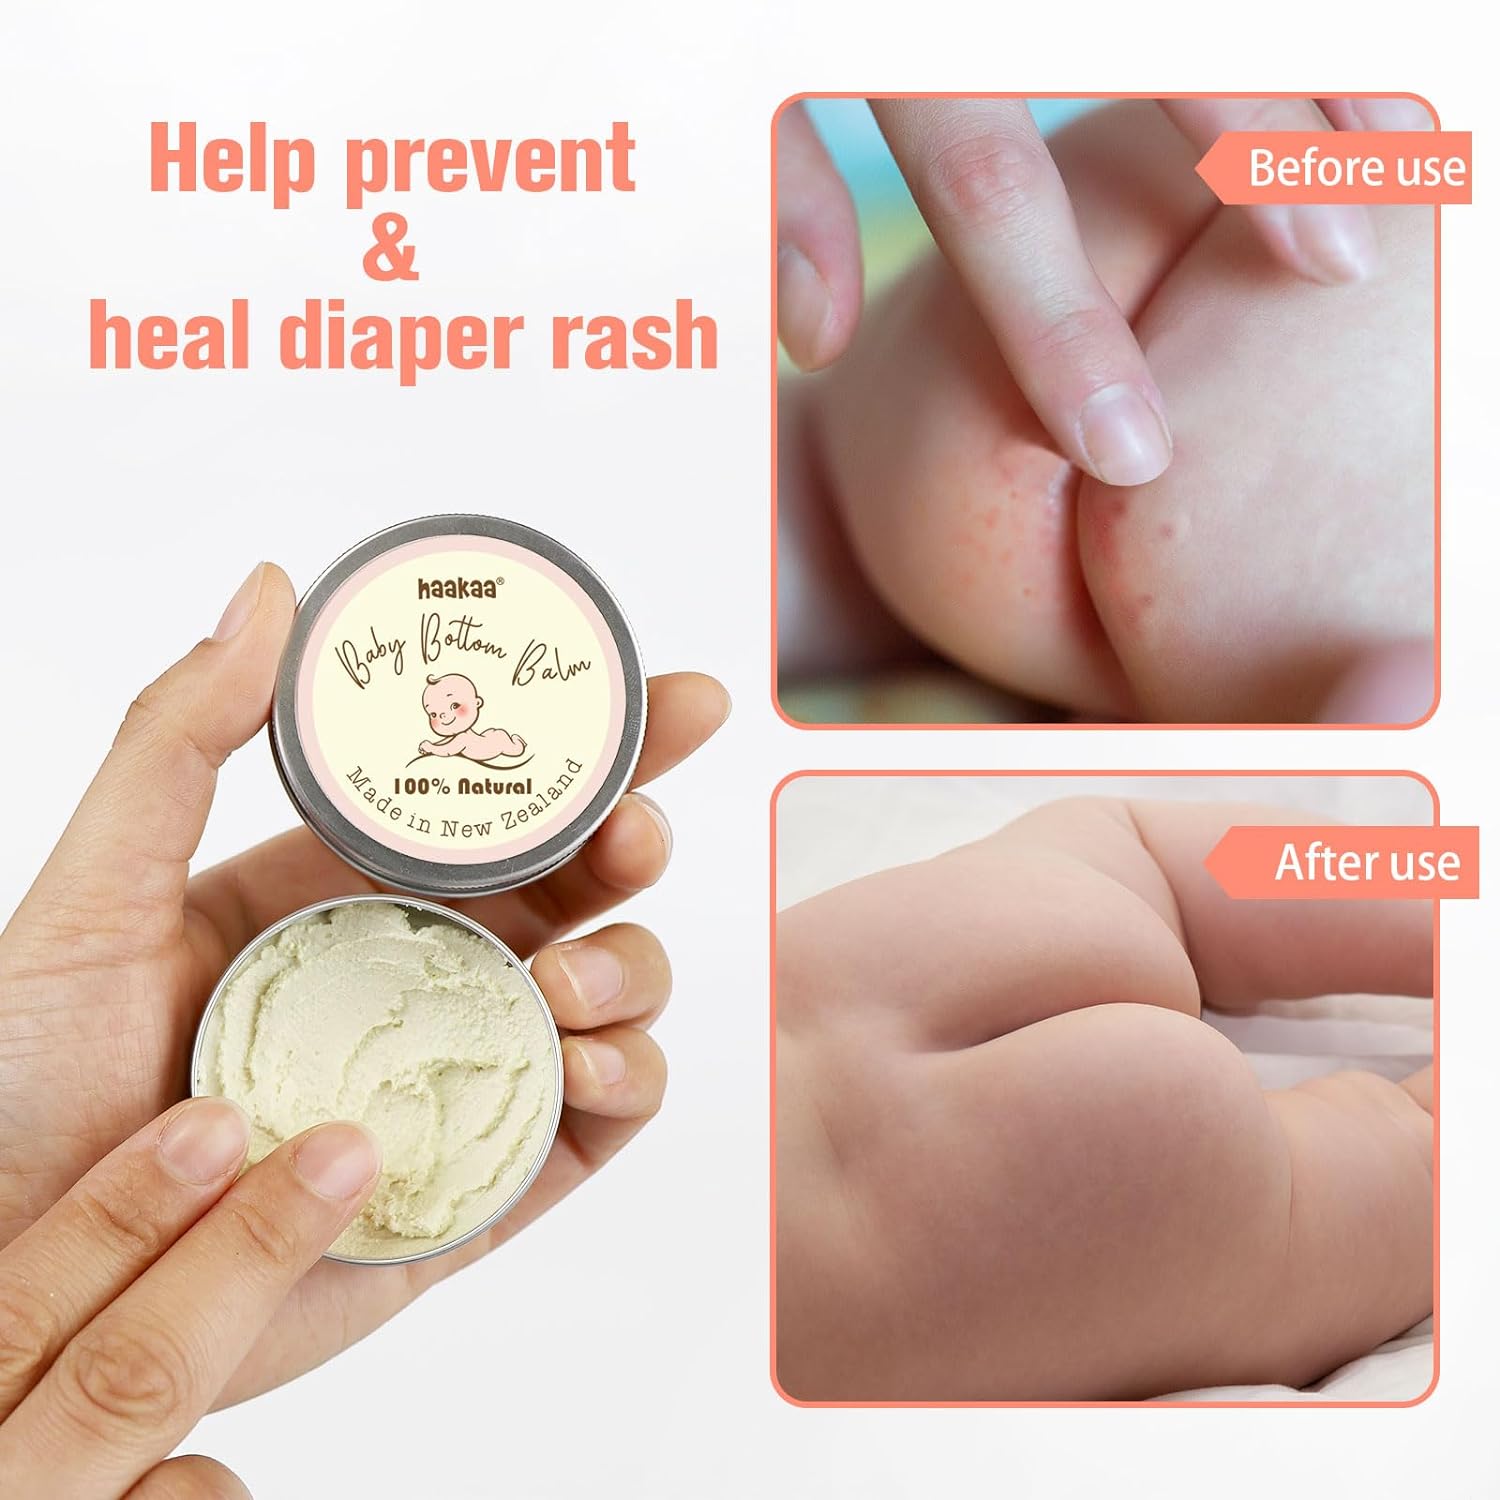 haakaa Baby Diaper Rash Cream, Dry Skin and Diaper Rash Ointment, Prevents and Soothes Diaper Rash Cream for Baby, Made in New Zealand 1.76 oz. : Baby